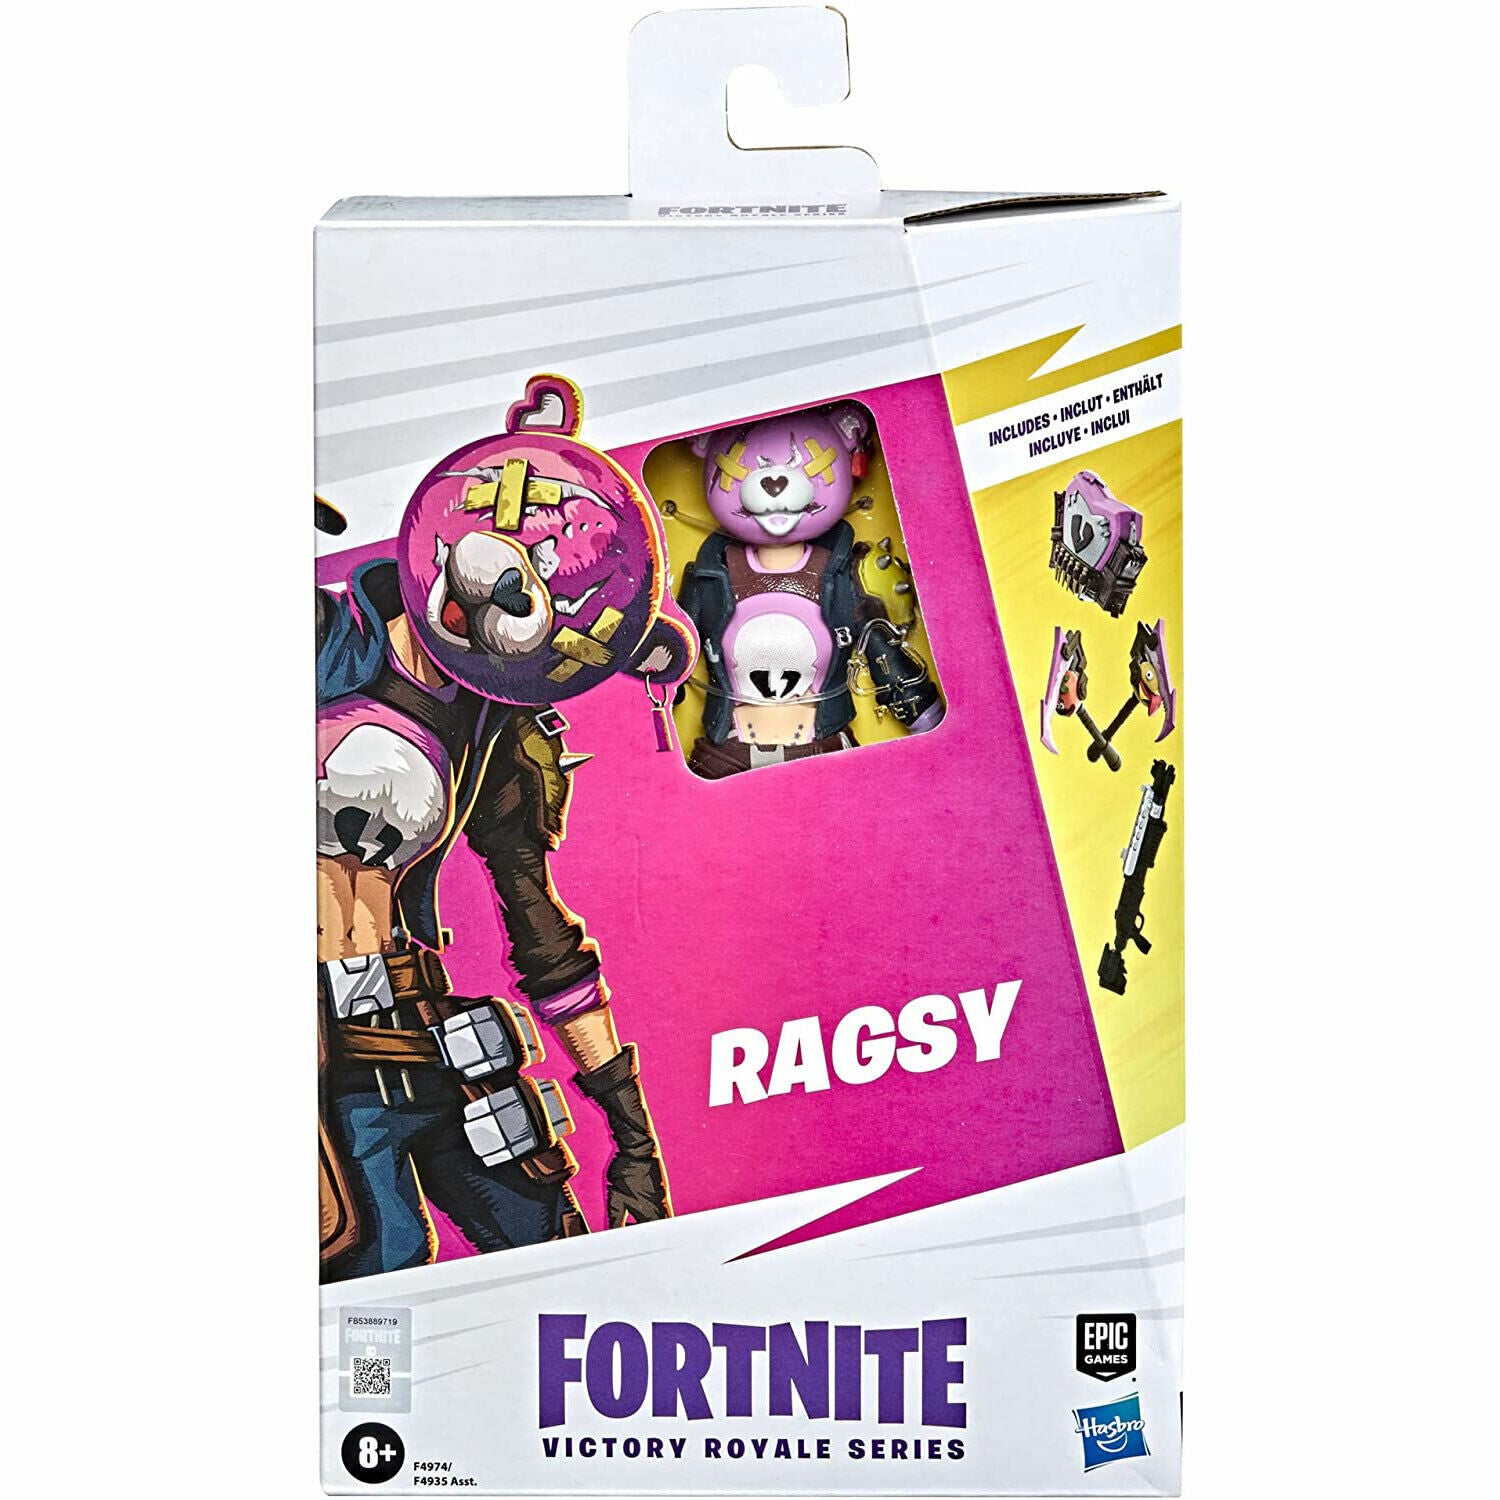 "Fortnite Victory Royale Ragsy 6" Action Figure - Brand New"